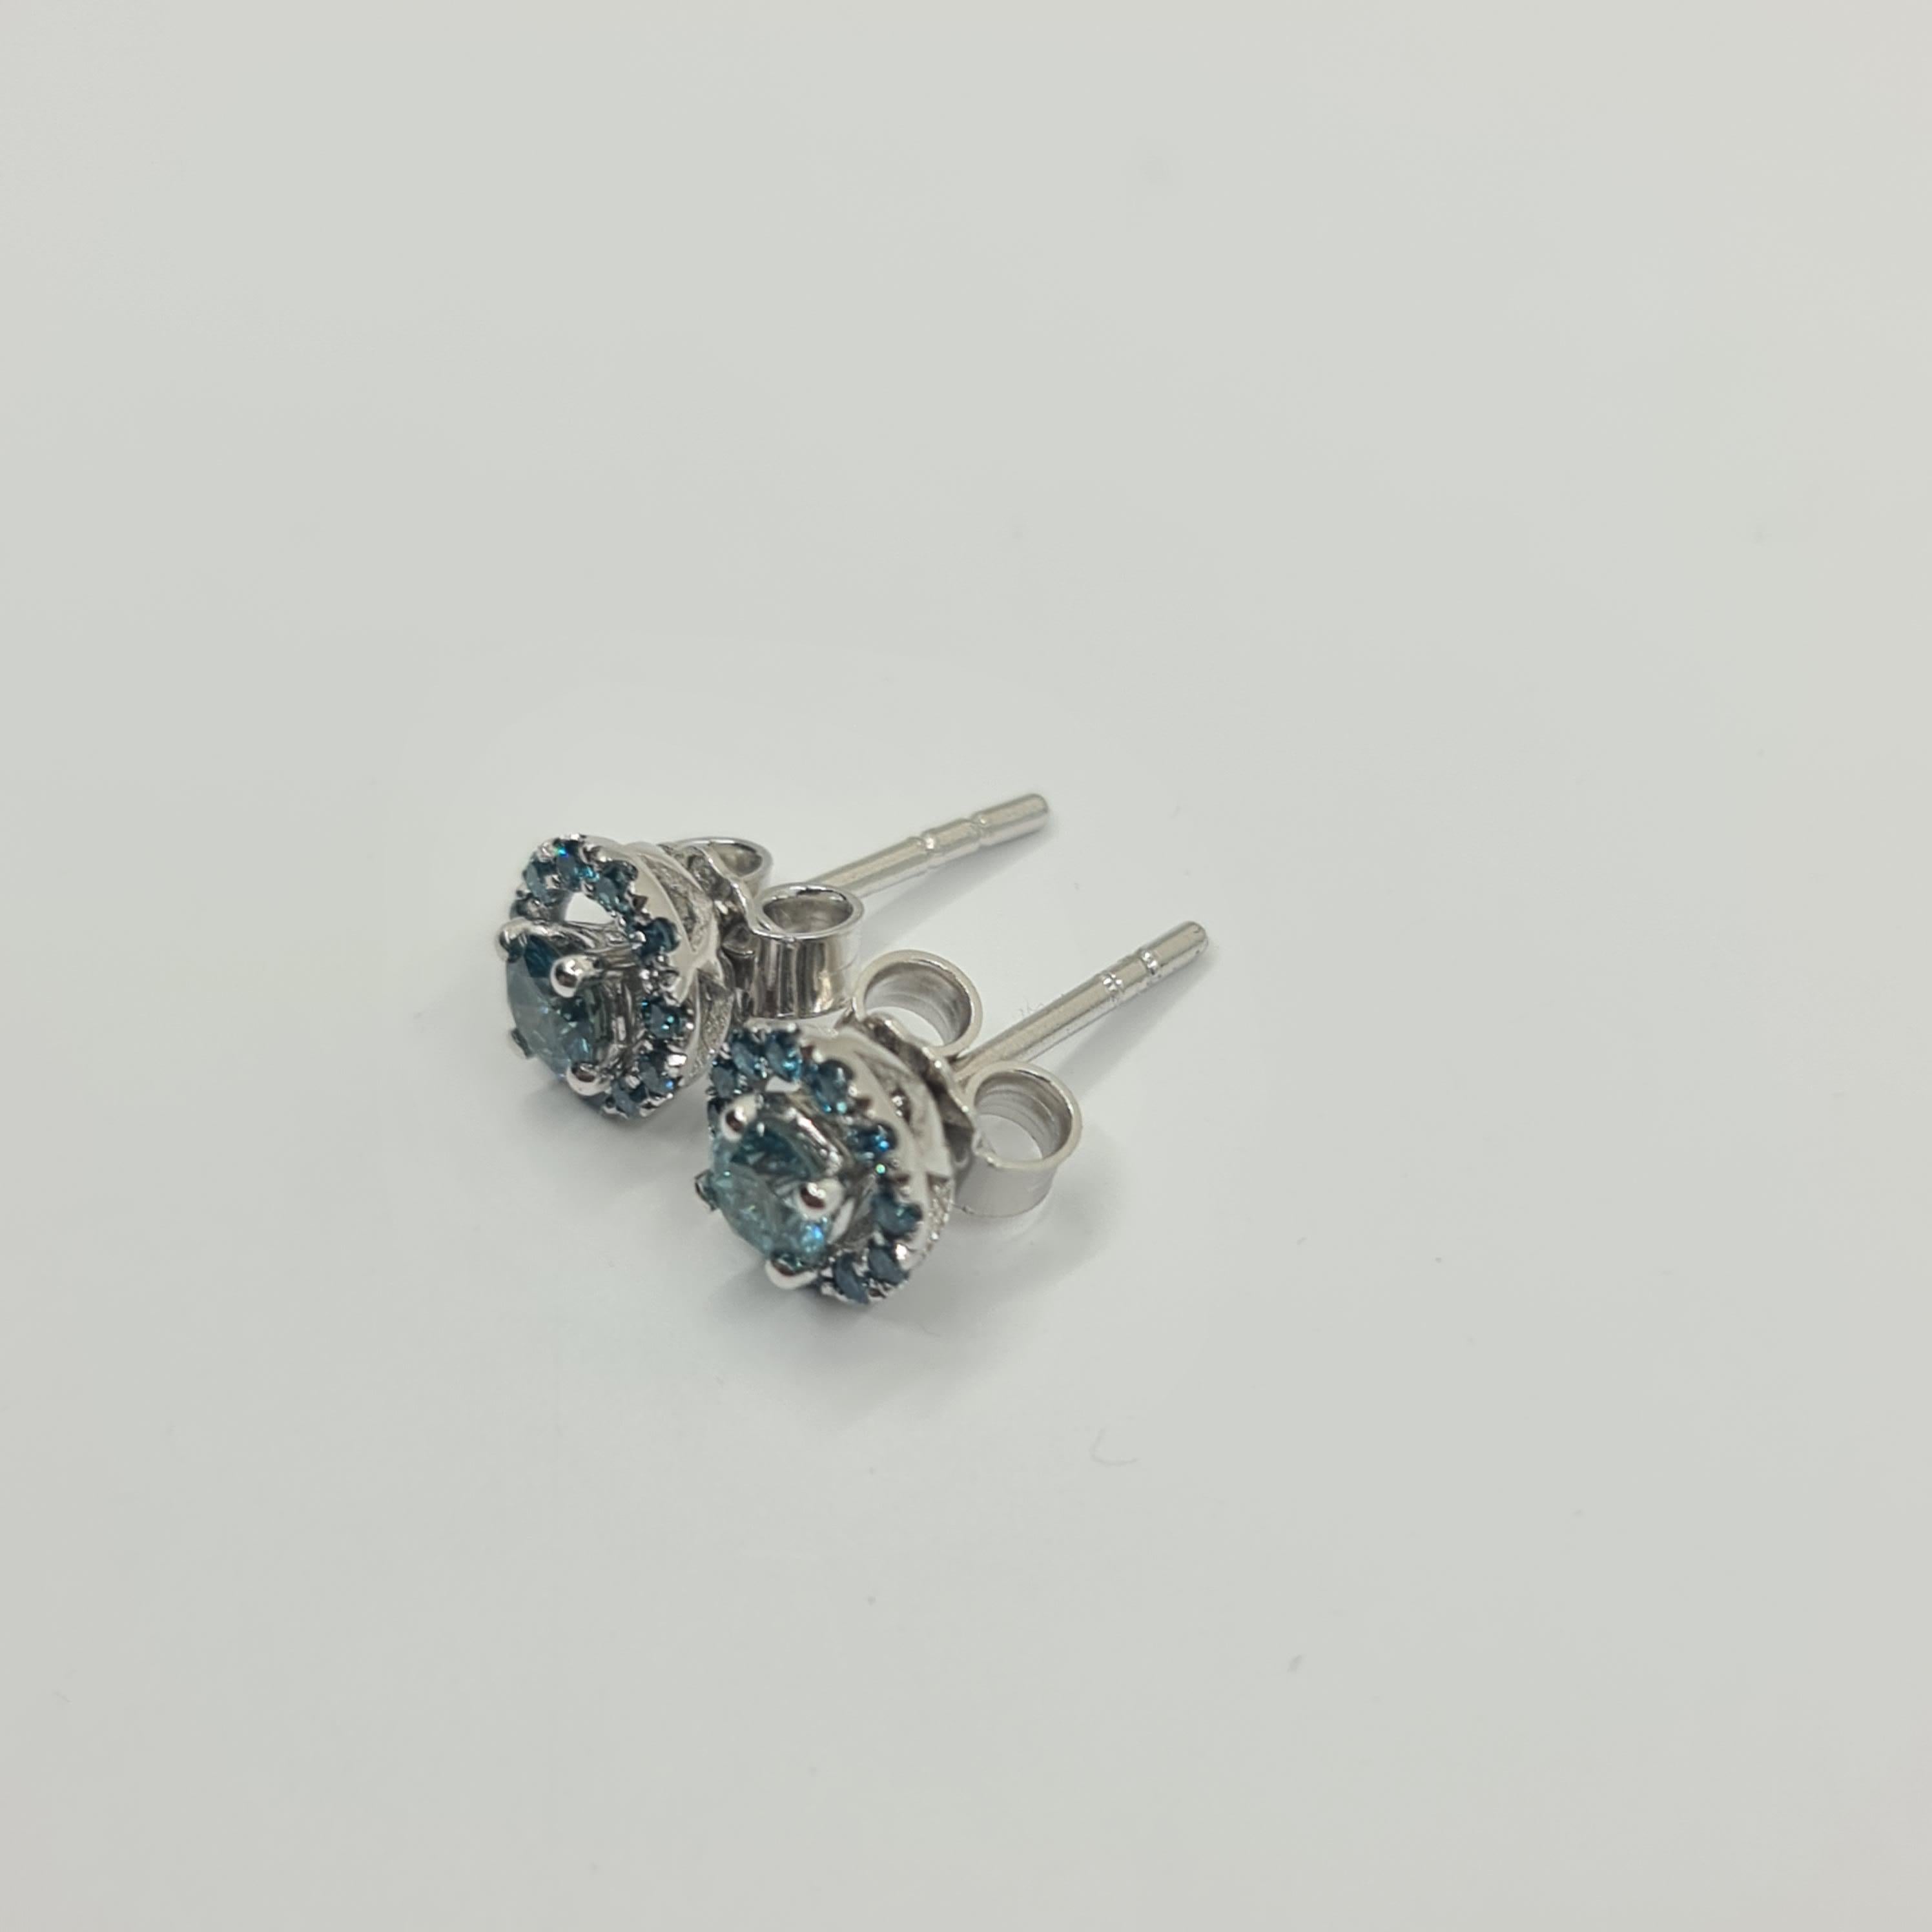 Exquisite GIA Certified Solitaire Diamond Studs 0.18/0.19 Carat Fancy Blue-Green For Sale 6